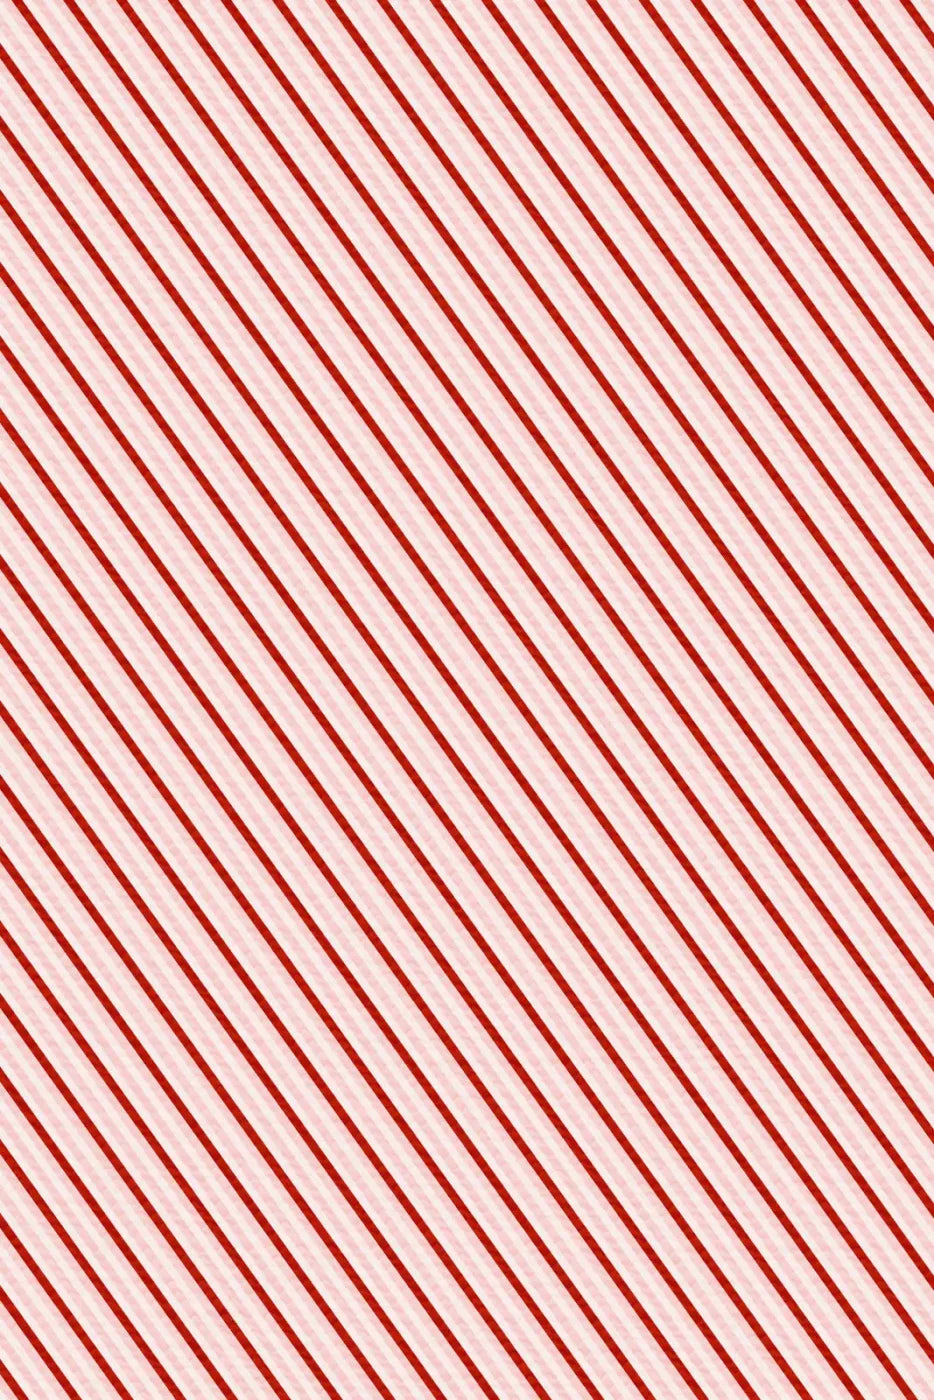 Candy Cane 4X5 Rubbermat Floor ( 48 X 60 Inch ) Backdrop